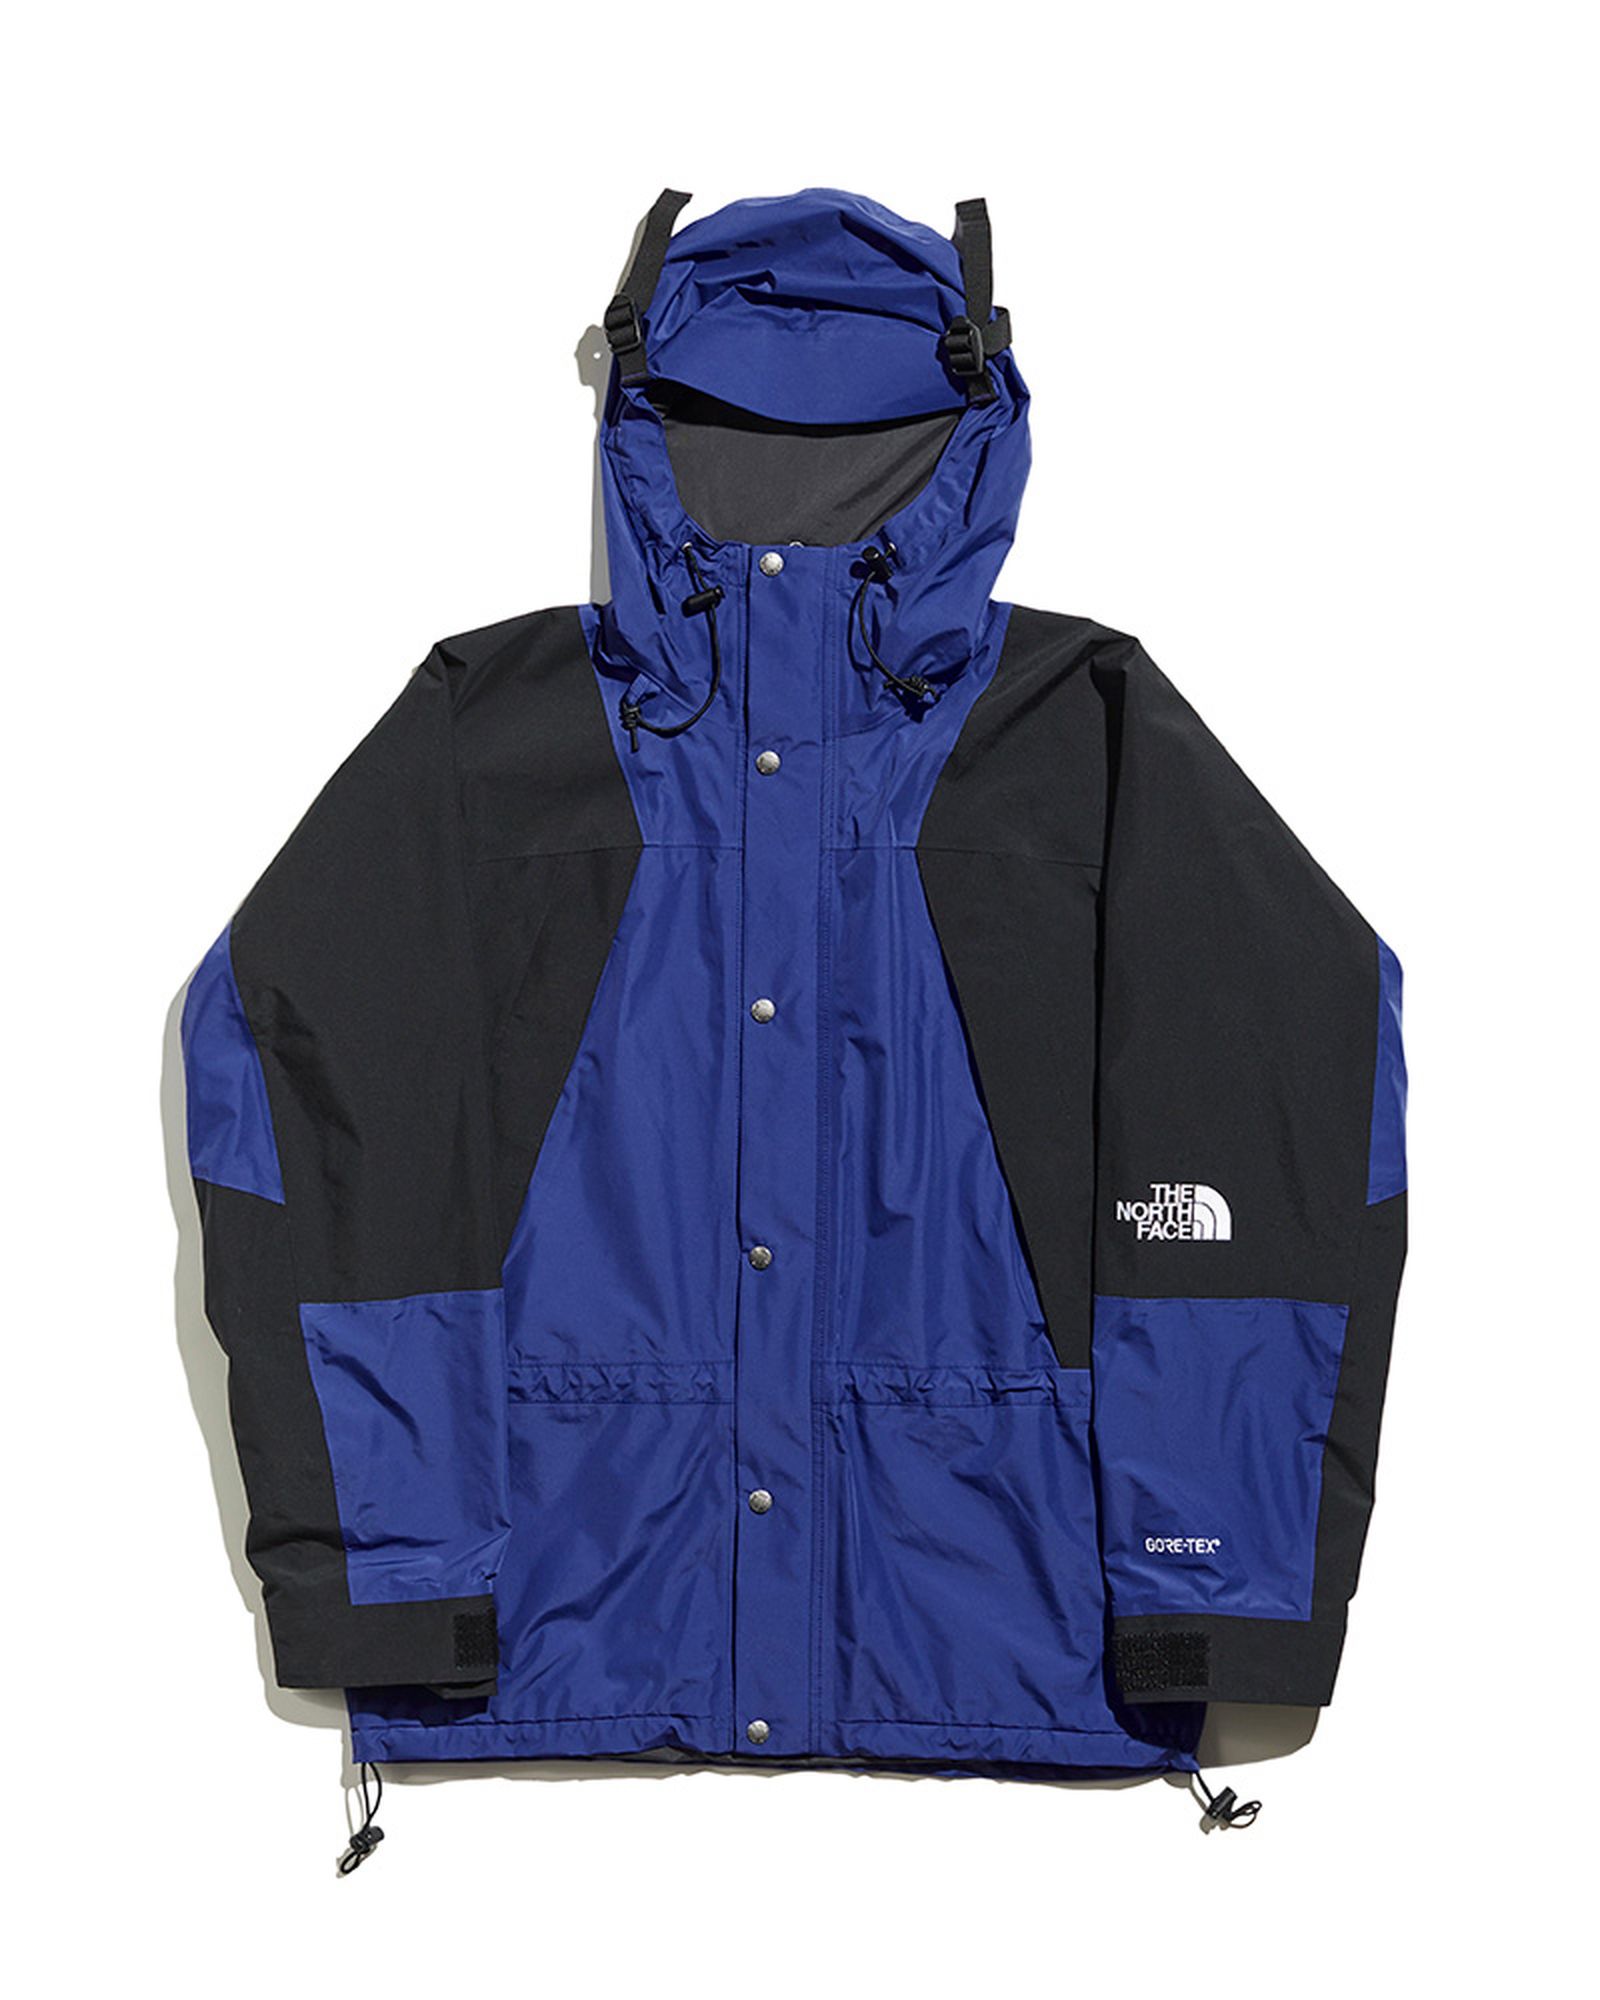 twelve Applied prison The North Face's Latest Jacket Is An Iconic '90s Revival